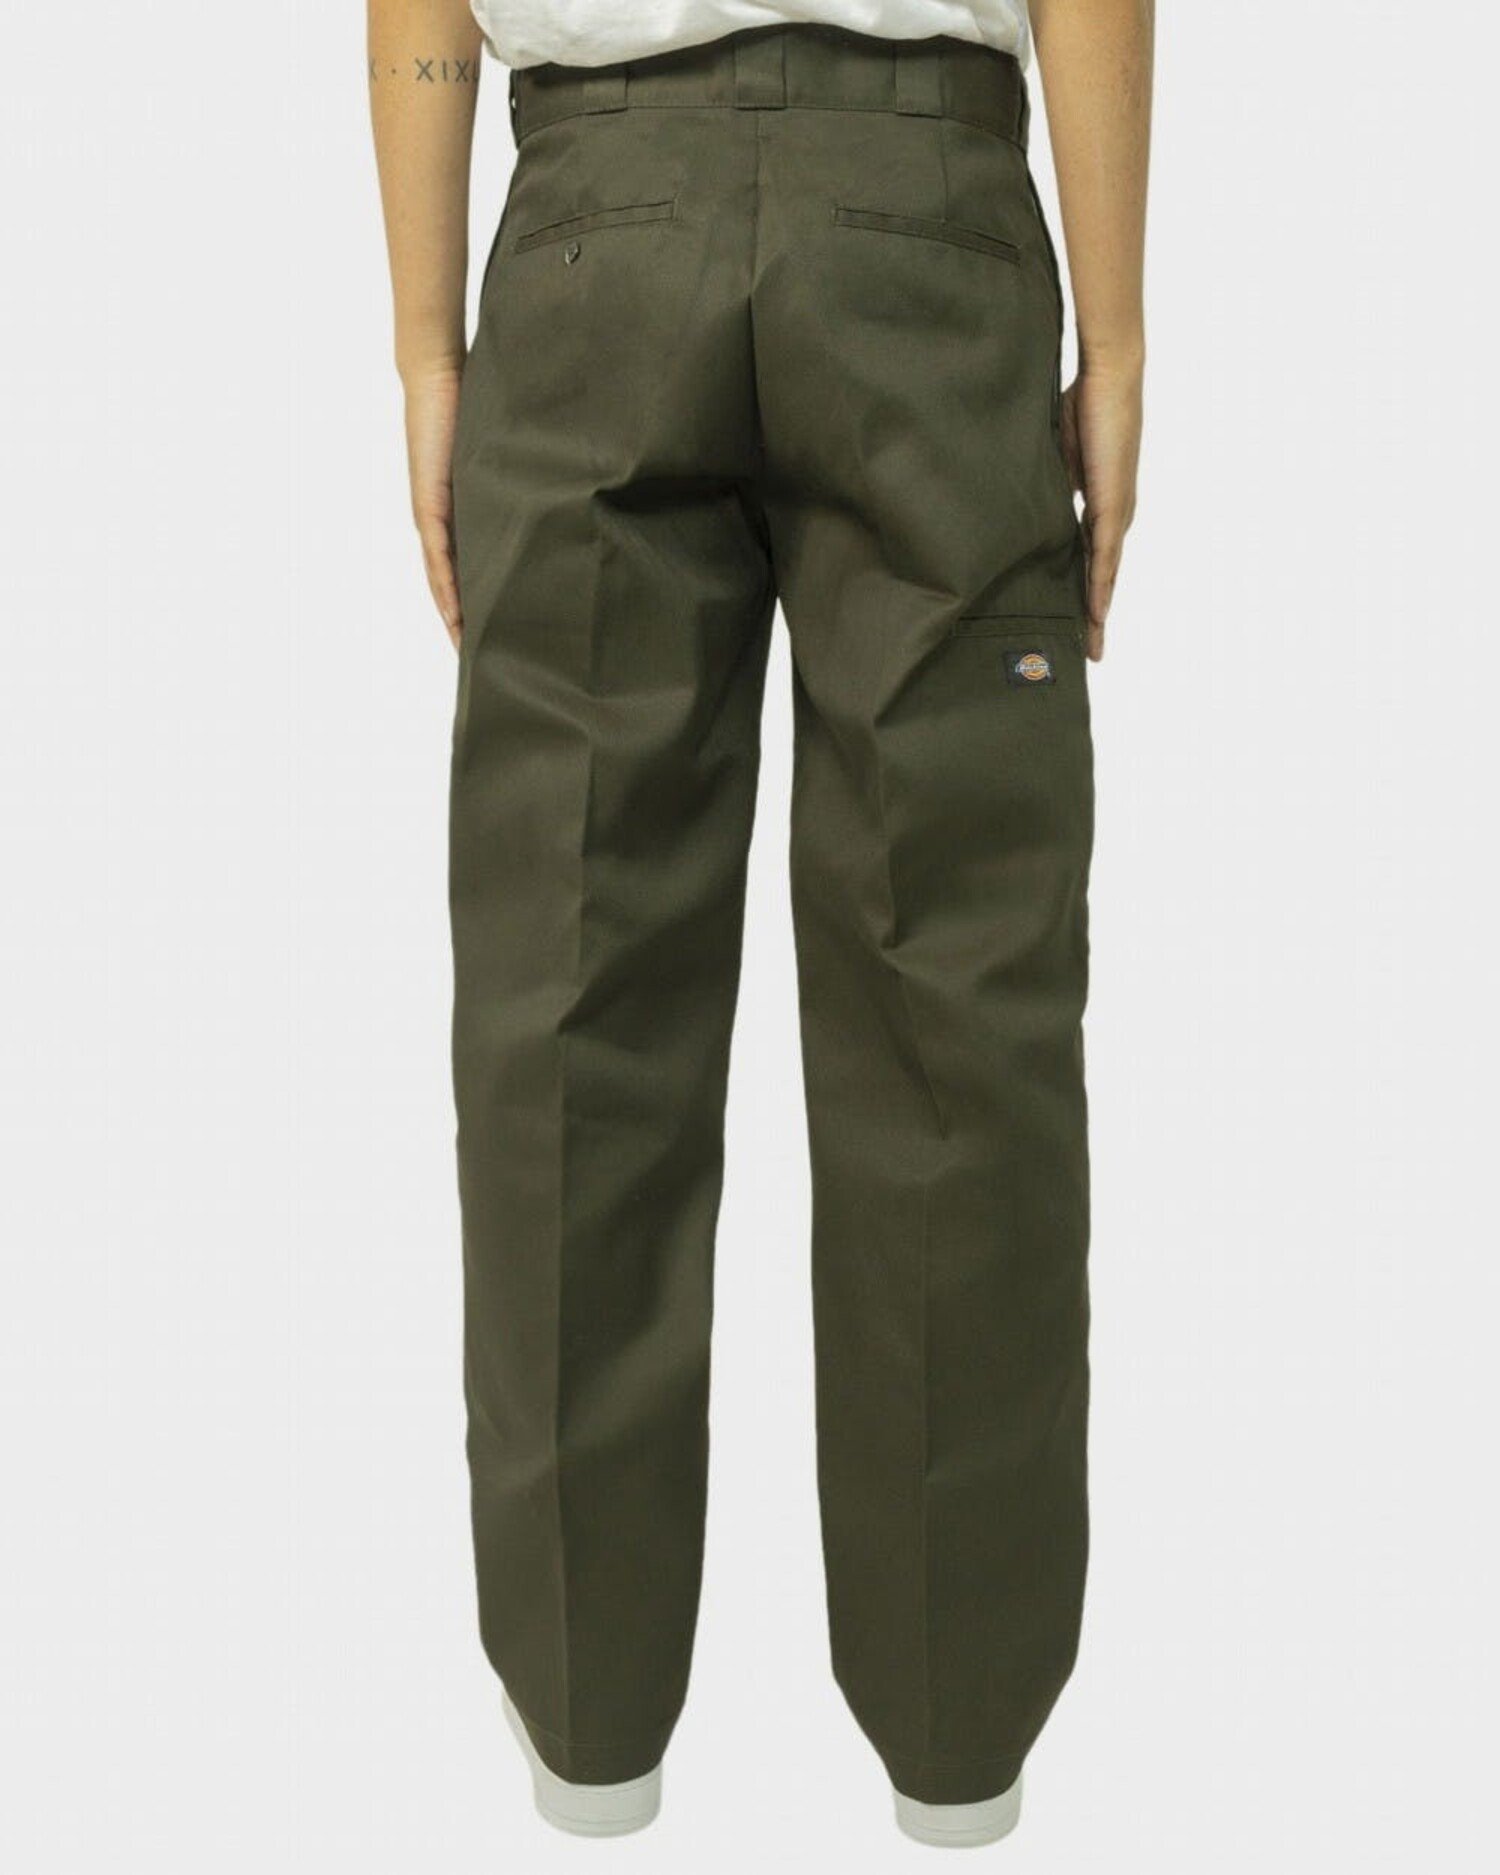 DICKIES OG TWILL DOUBLE KNEE PANT OLIVE GREEN - The Choice Shop